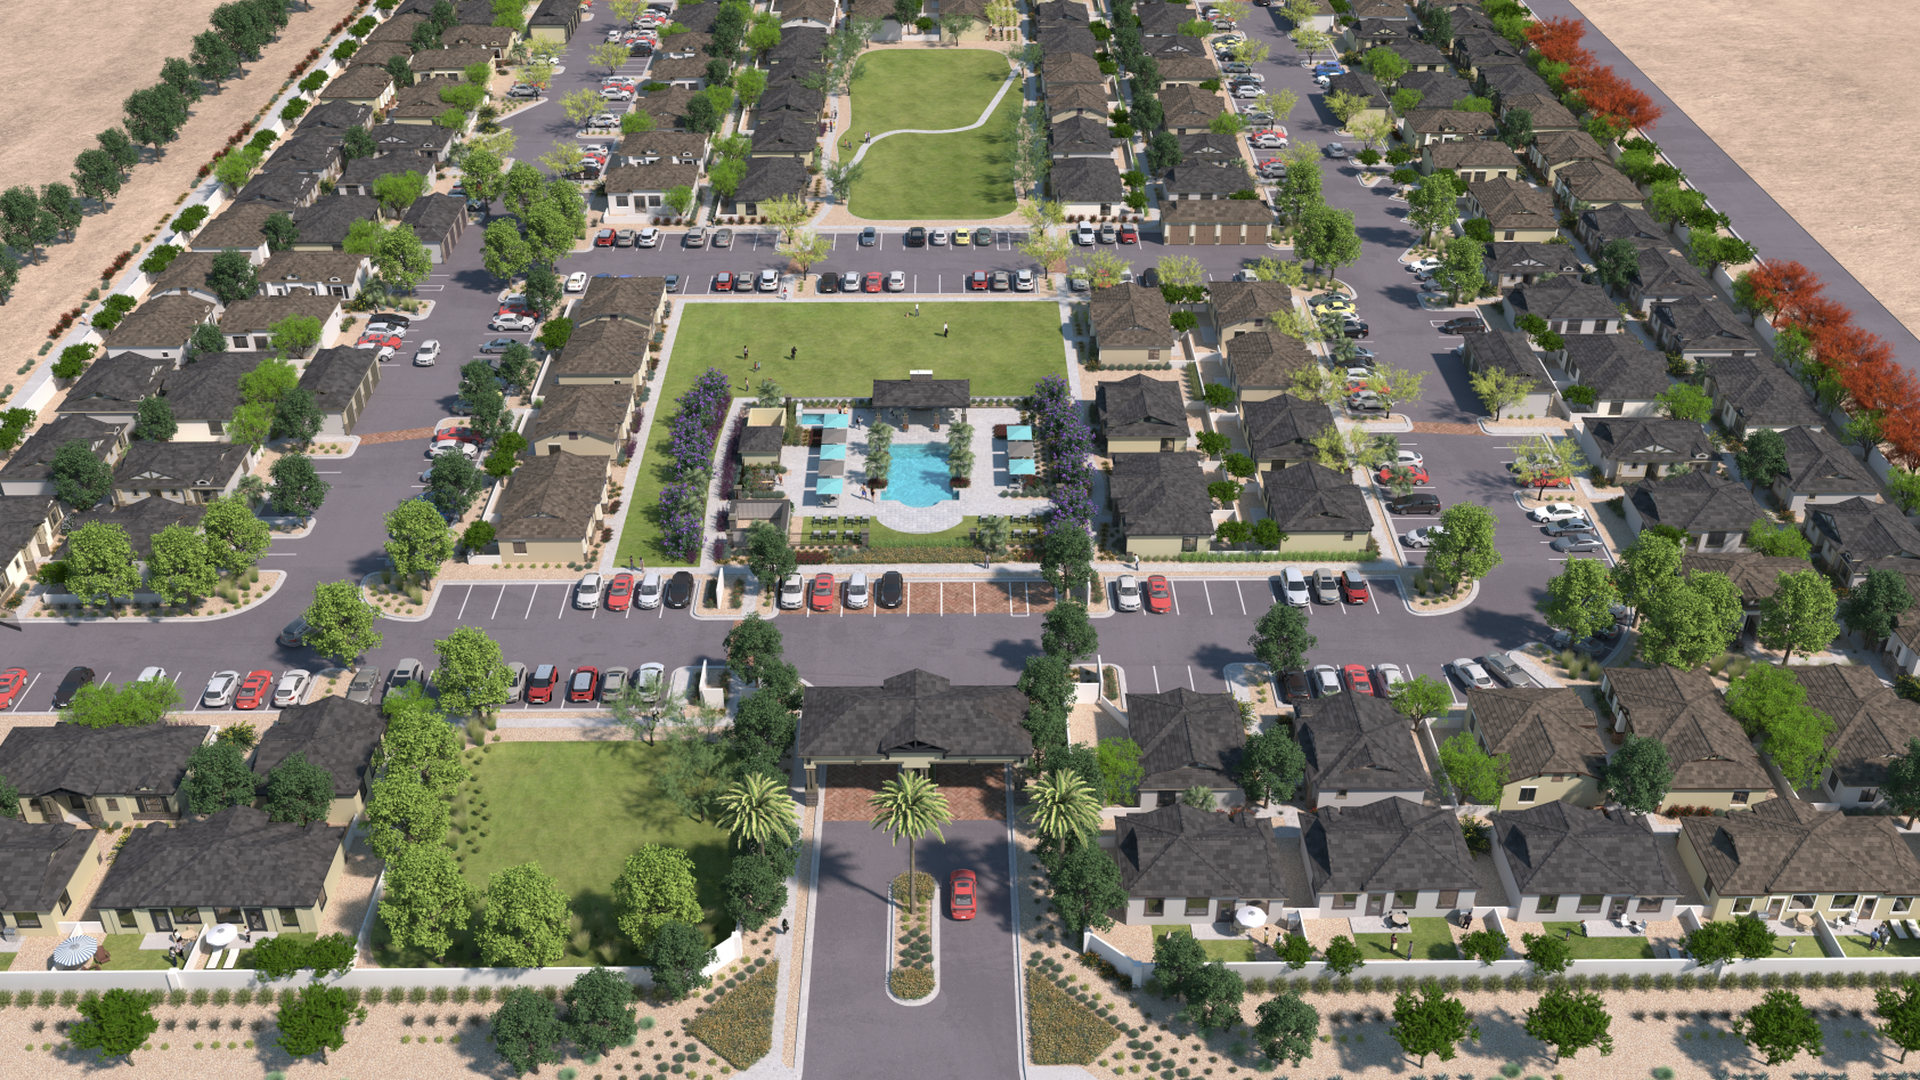 An aerial view of a Picket Fence development